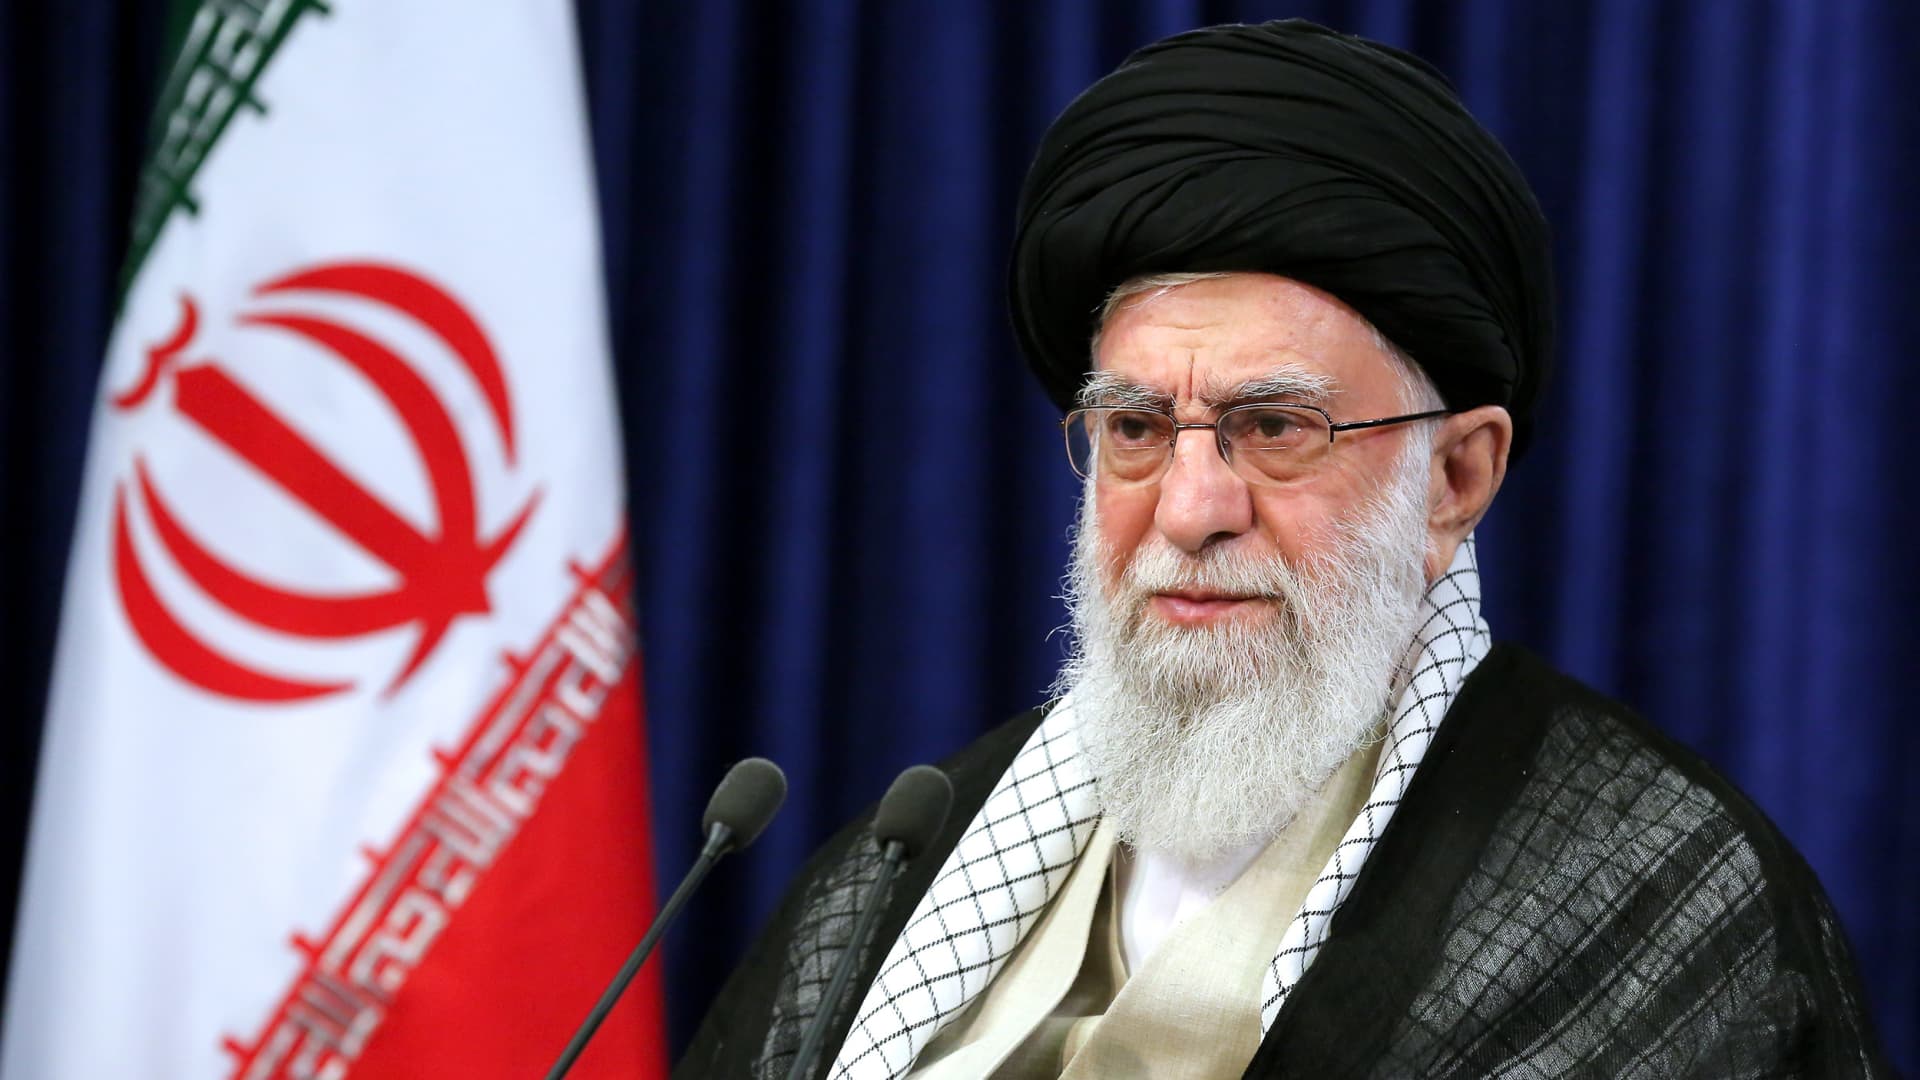 Iranian Supreme Leader Ali Khamenei speaks on the death anniversary of the leader of the Iranian revolution, Ruhollah Khomeini during a live broadcast on state television in Tehran, Iran on June 03, 2020.